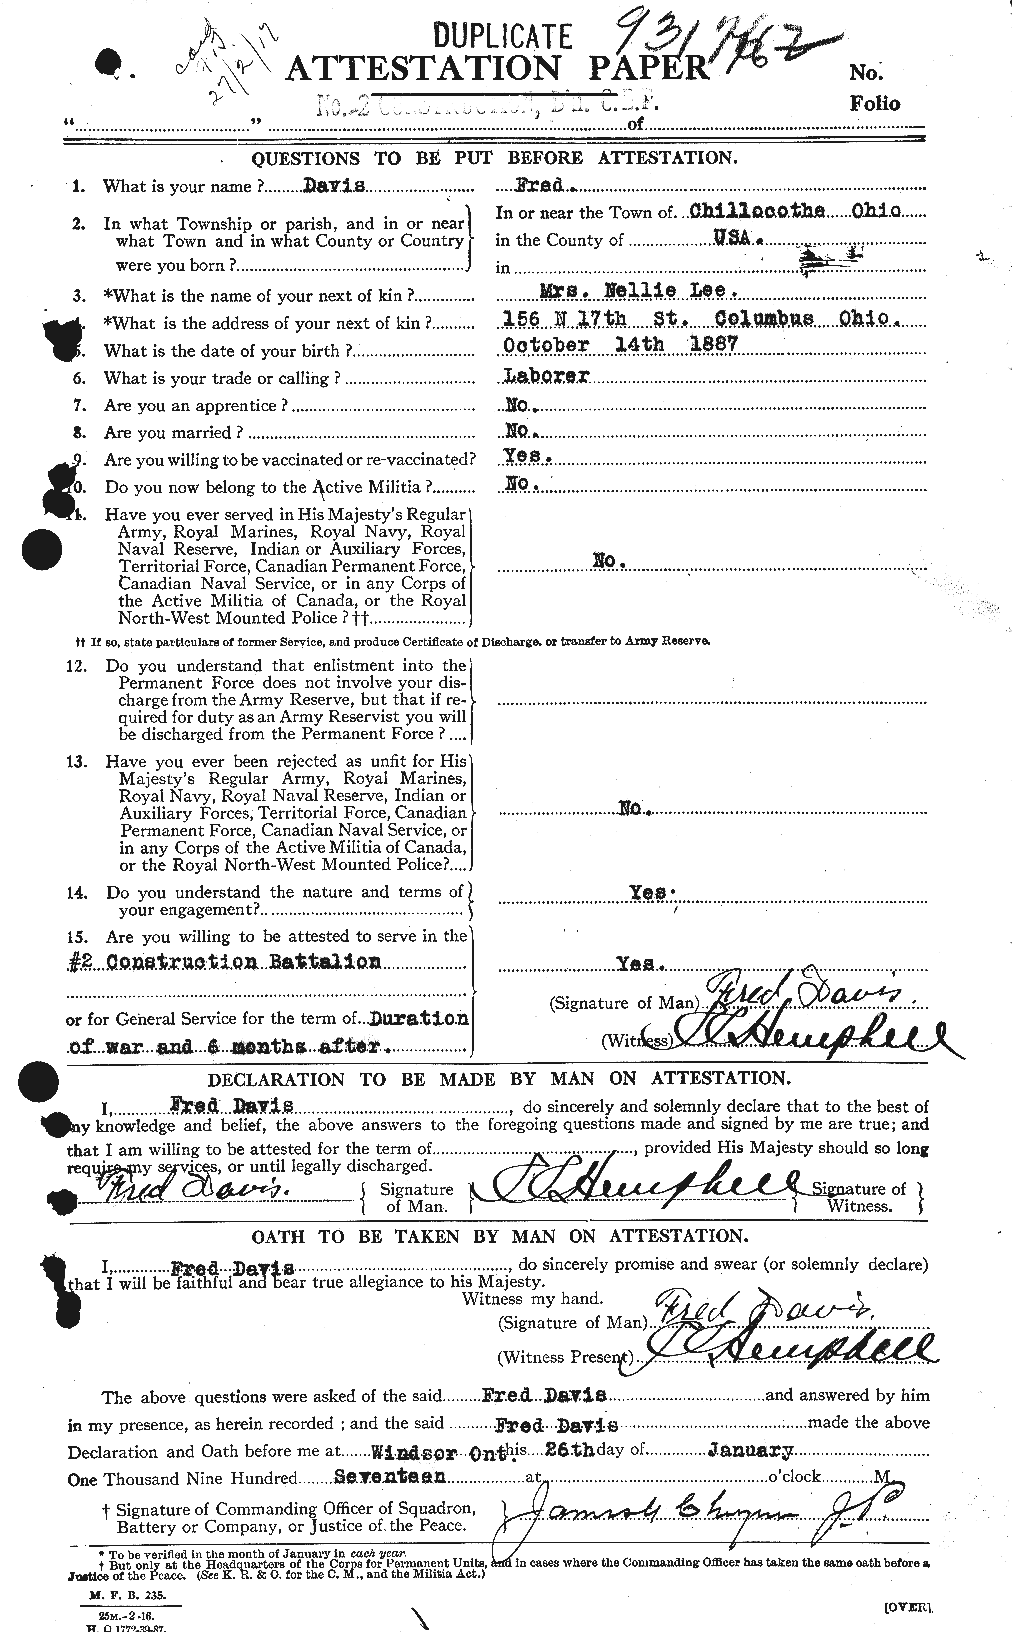 Personnel Records of the First World War - CEF 281921a